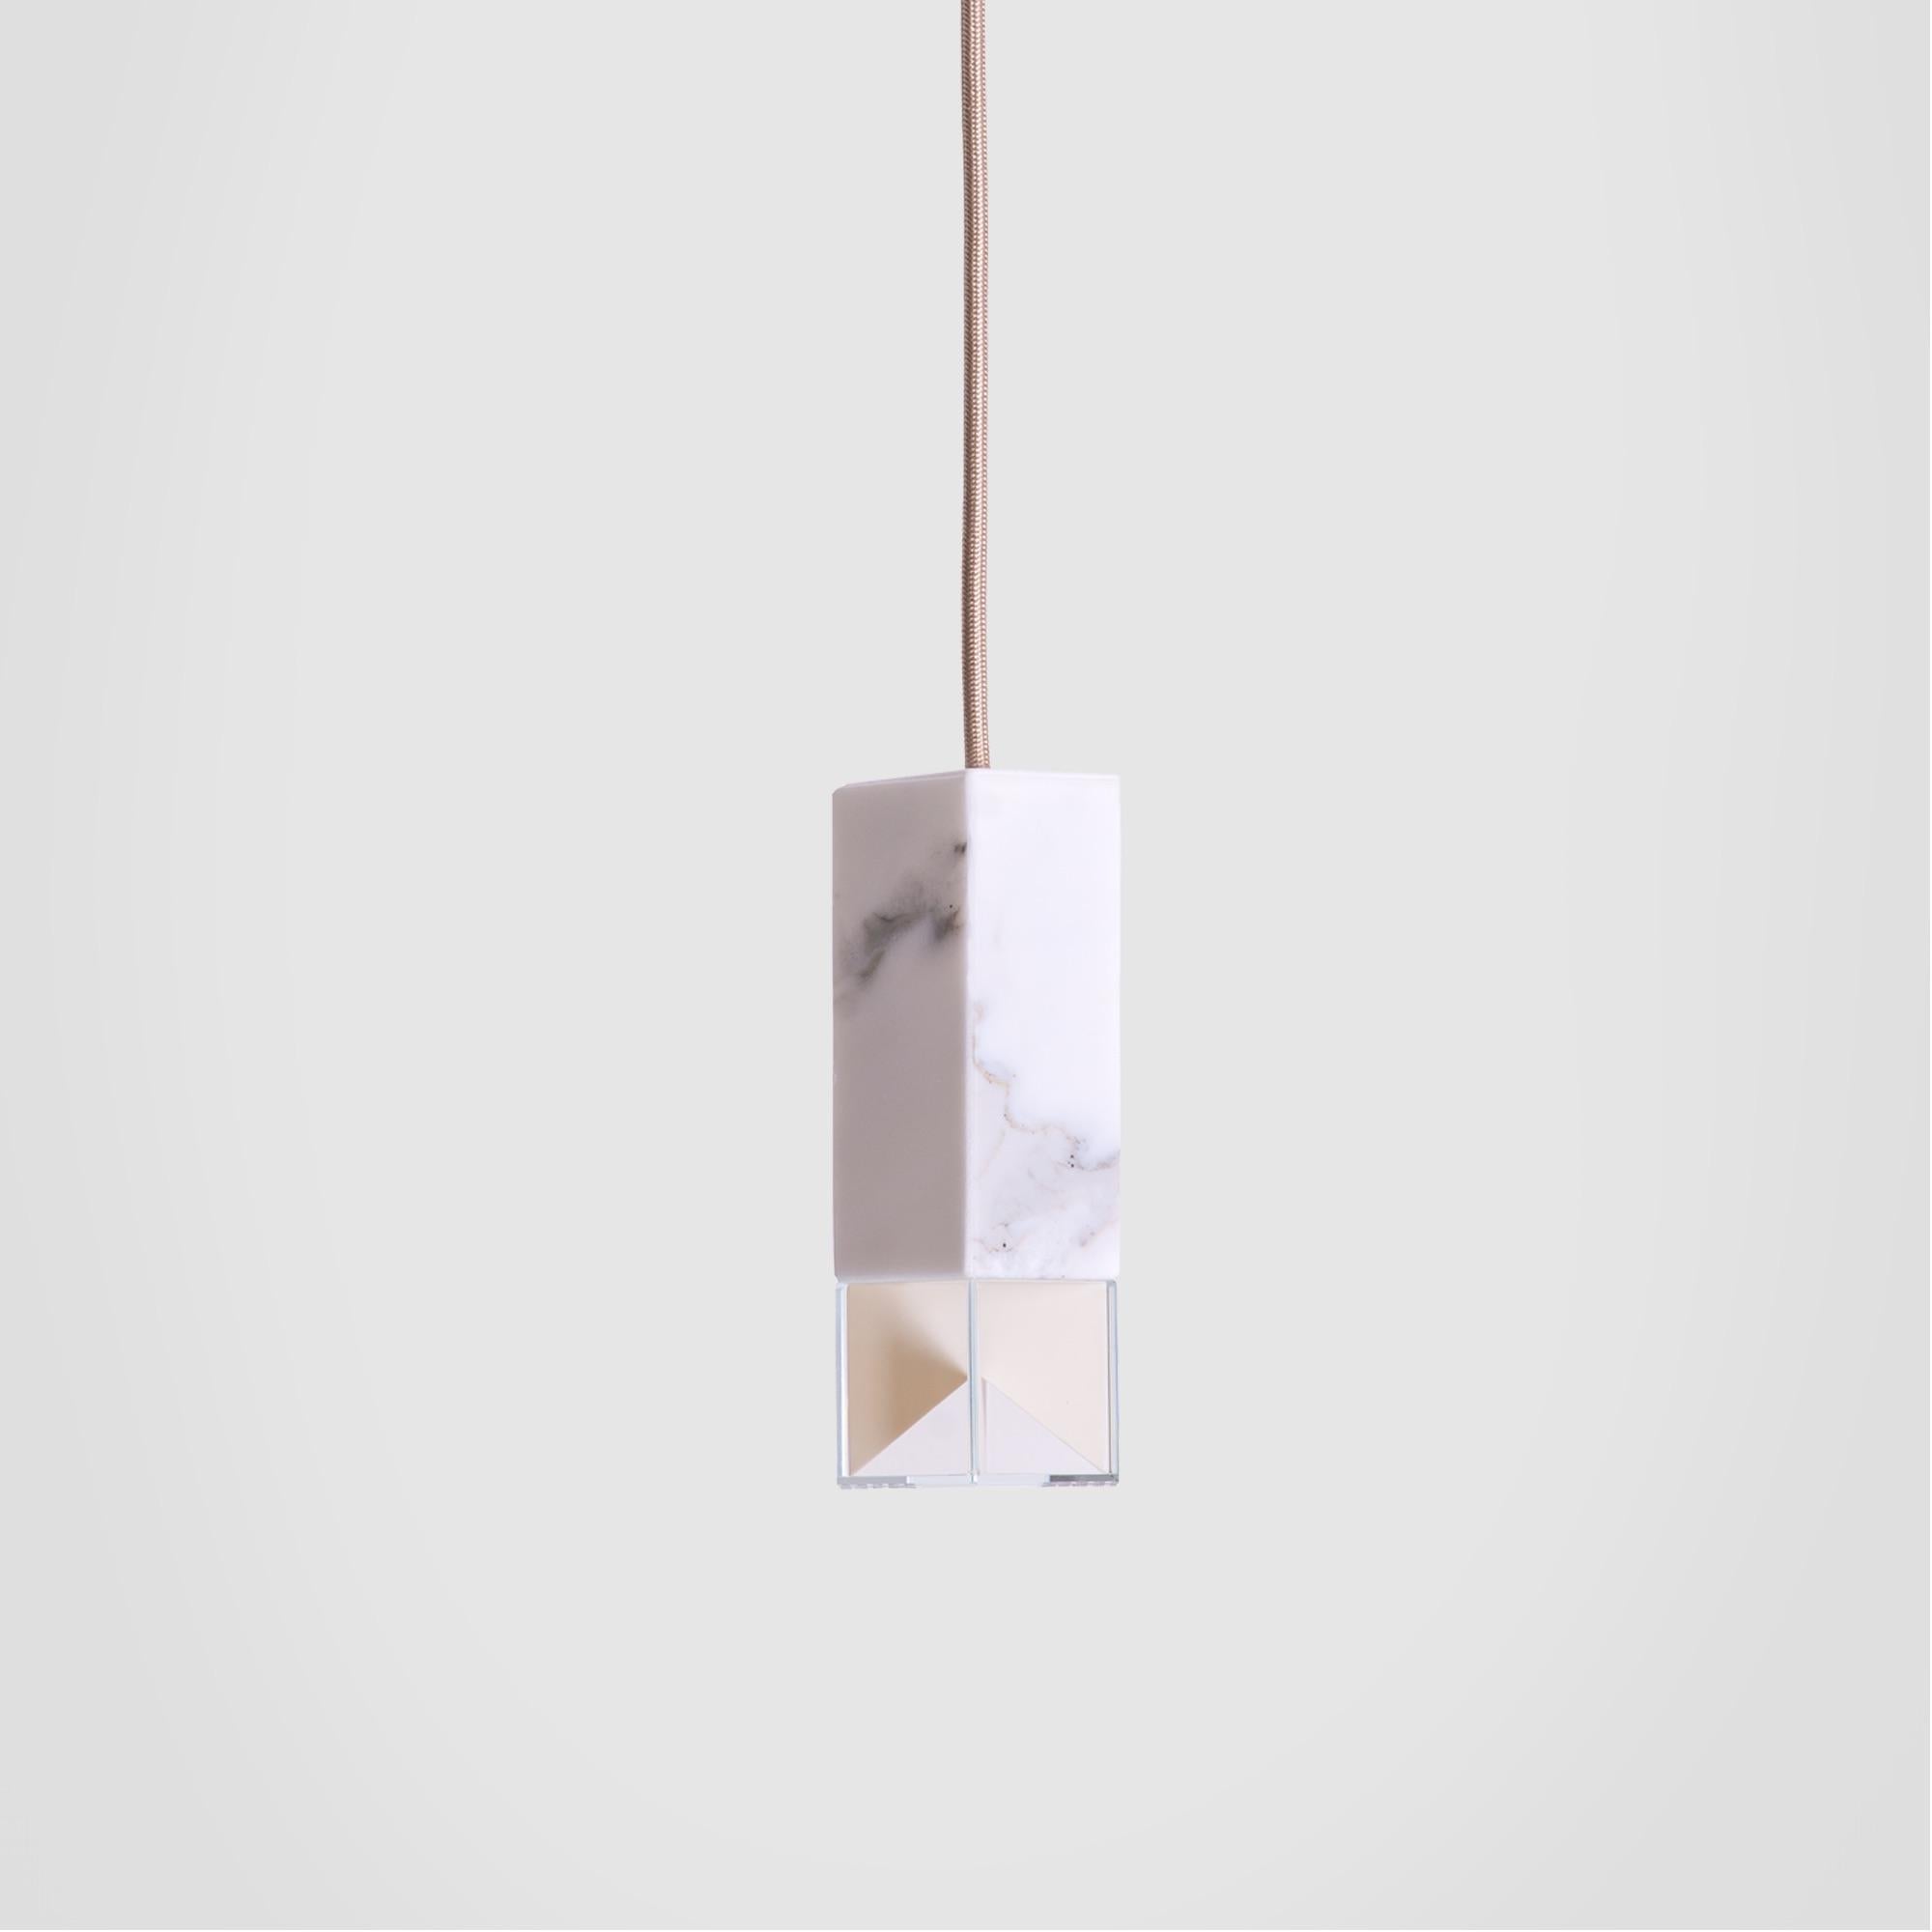 About
Calacatta Marble Pendant Lamp Single Suspension by Formaminima

Lamp/One Marble from Single Suspensions Series
Design by Formaminima
Single Pendant
Materials:
Body lamp handcrafted in solid Calacatta marble / crystal glass diffuser hosting